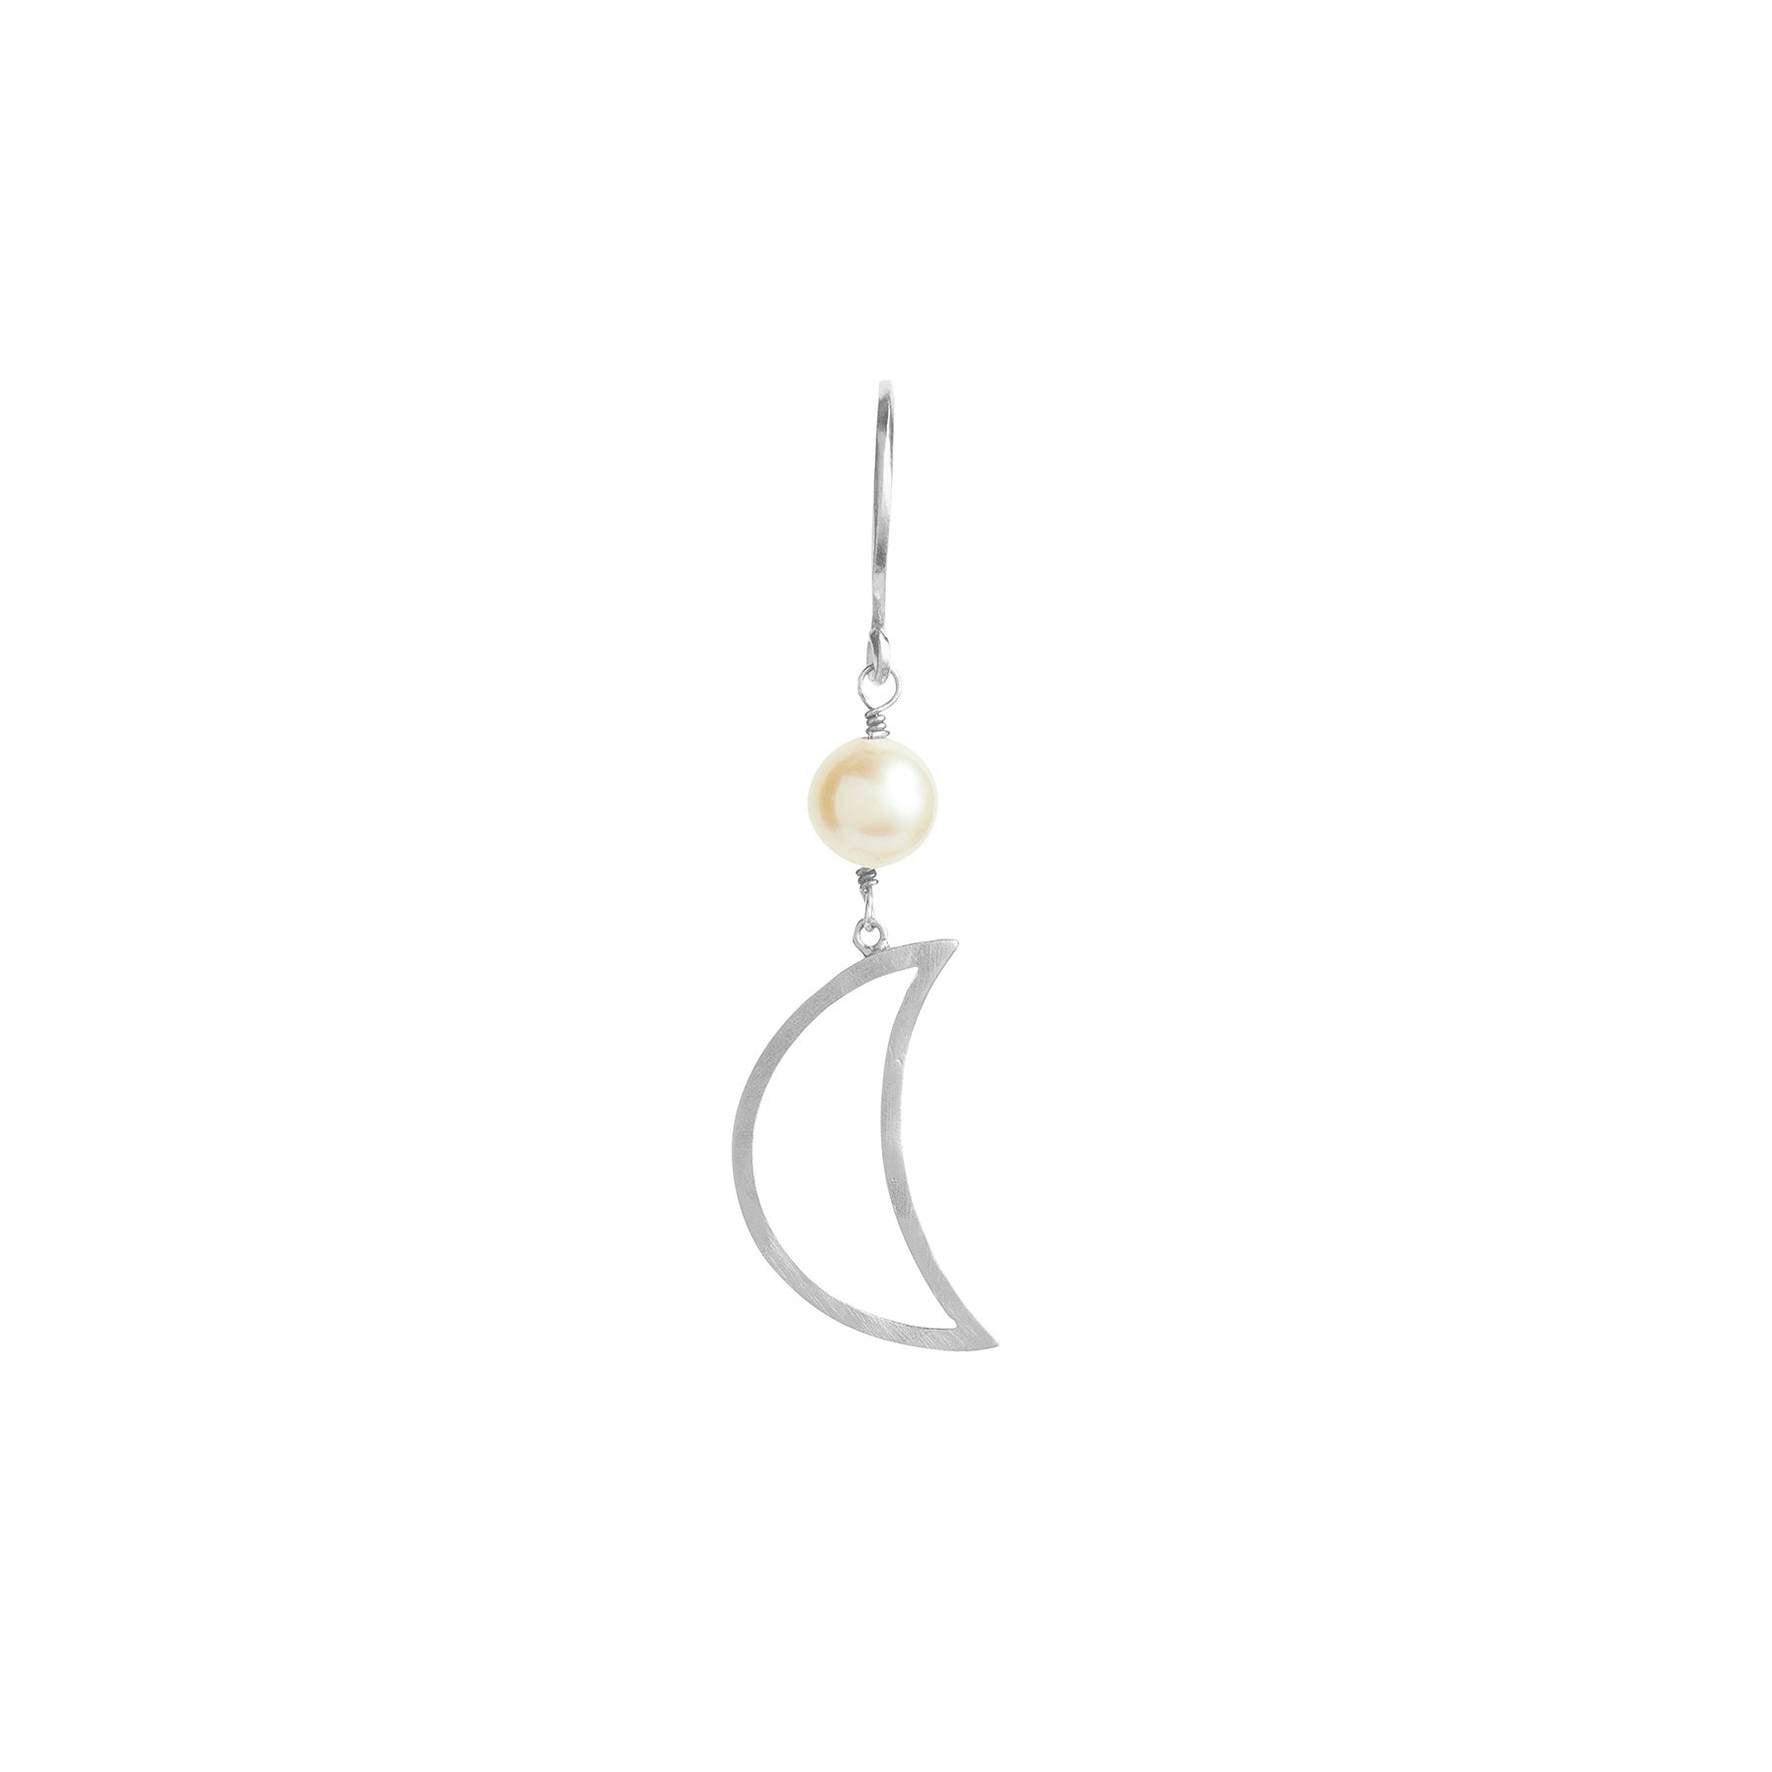 Bella Moon Earring With Pearl fra STINE A Jewelry i Sølv Sterling 925